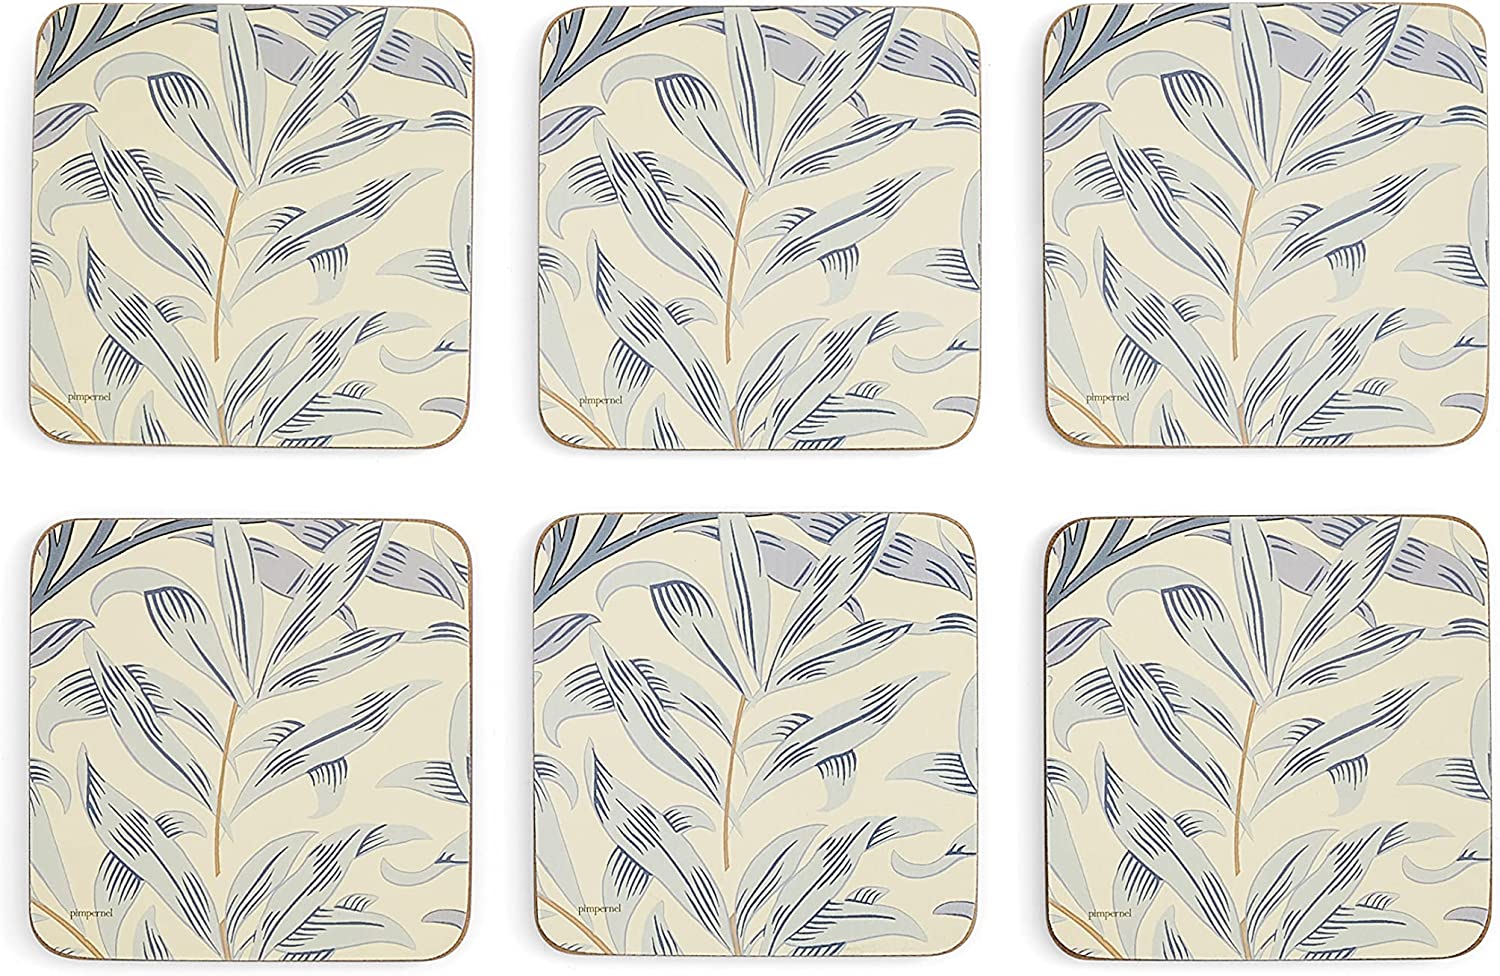 Blue Willow Bough Coasters (Set of 6) - Morris & Co.